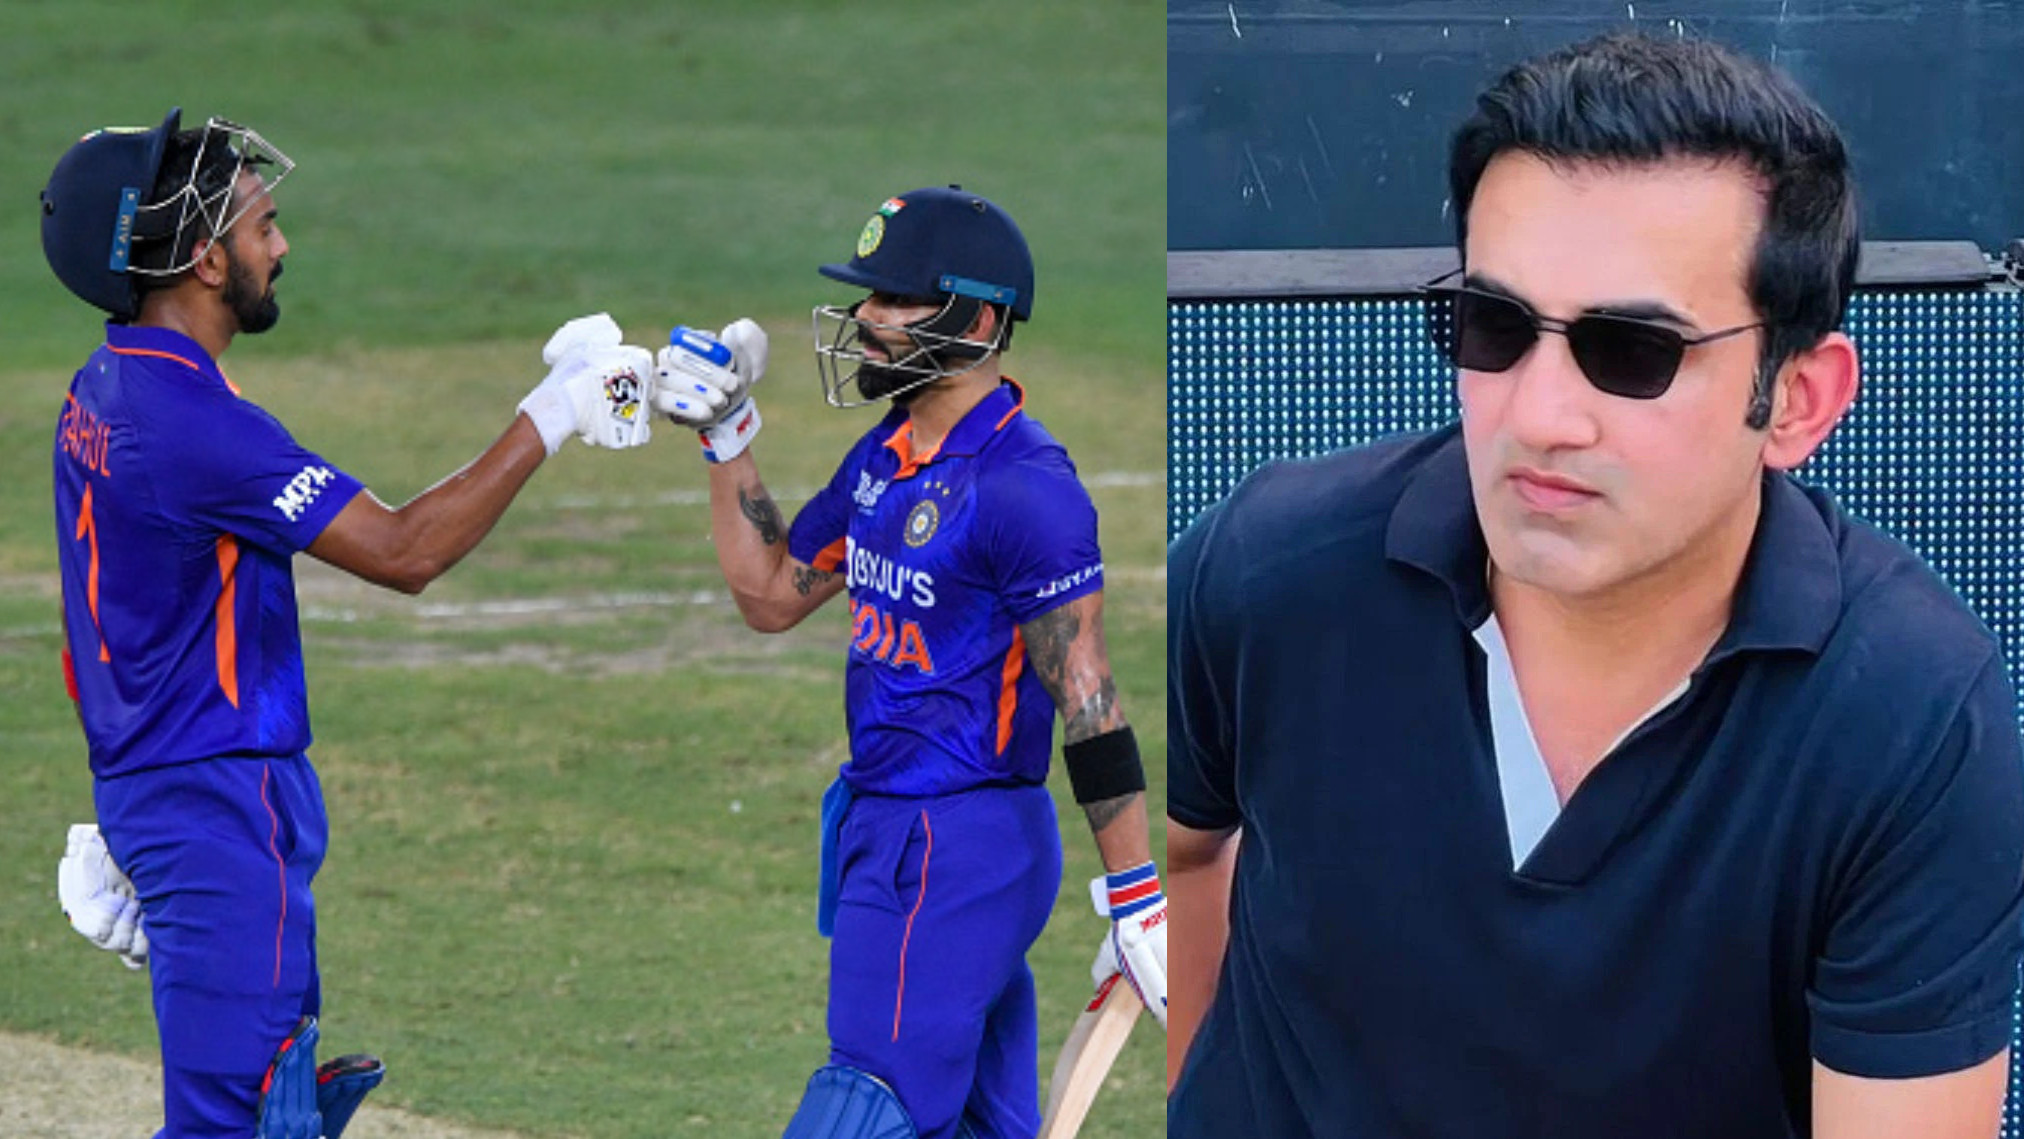 ‘Imagine the insecurity KL Rahul must be feeling’- Gambhir on calls for Virat Kohli to open for India